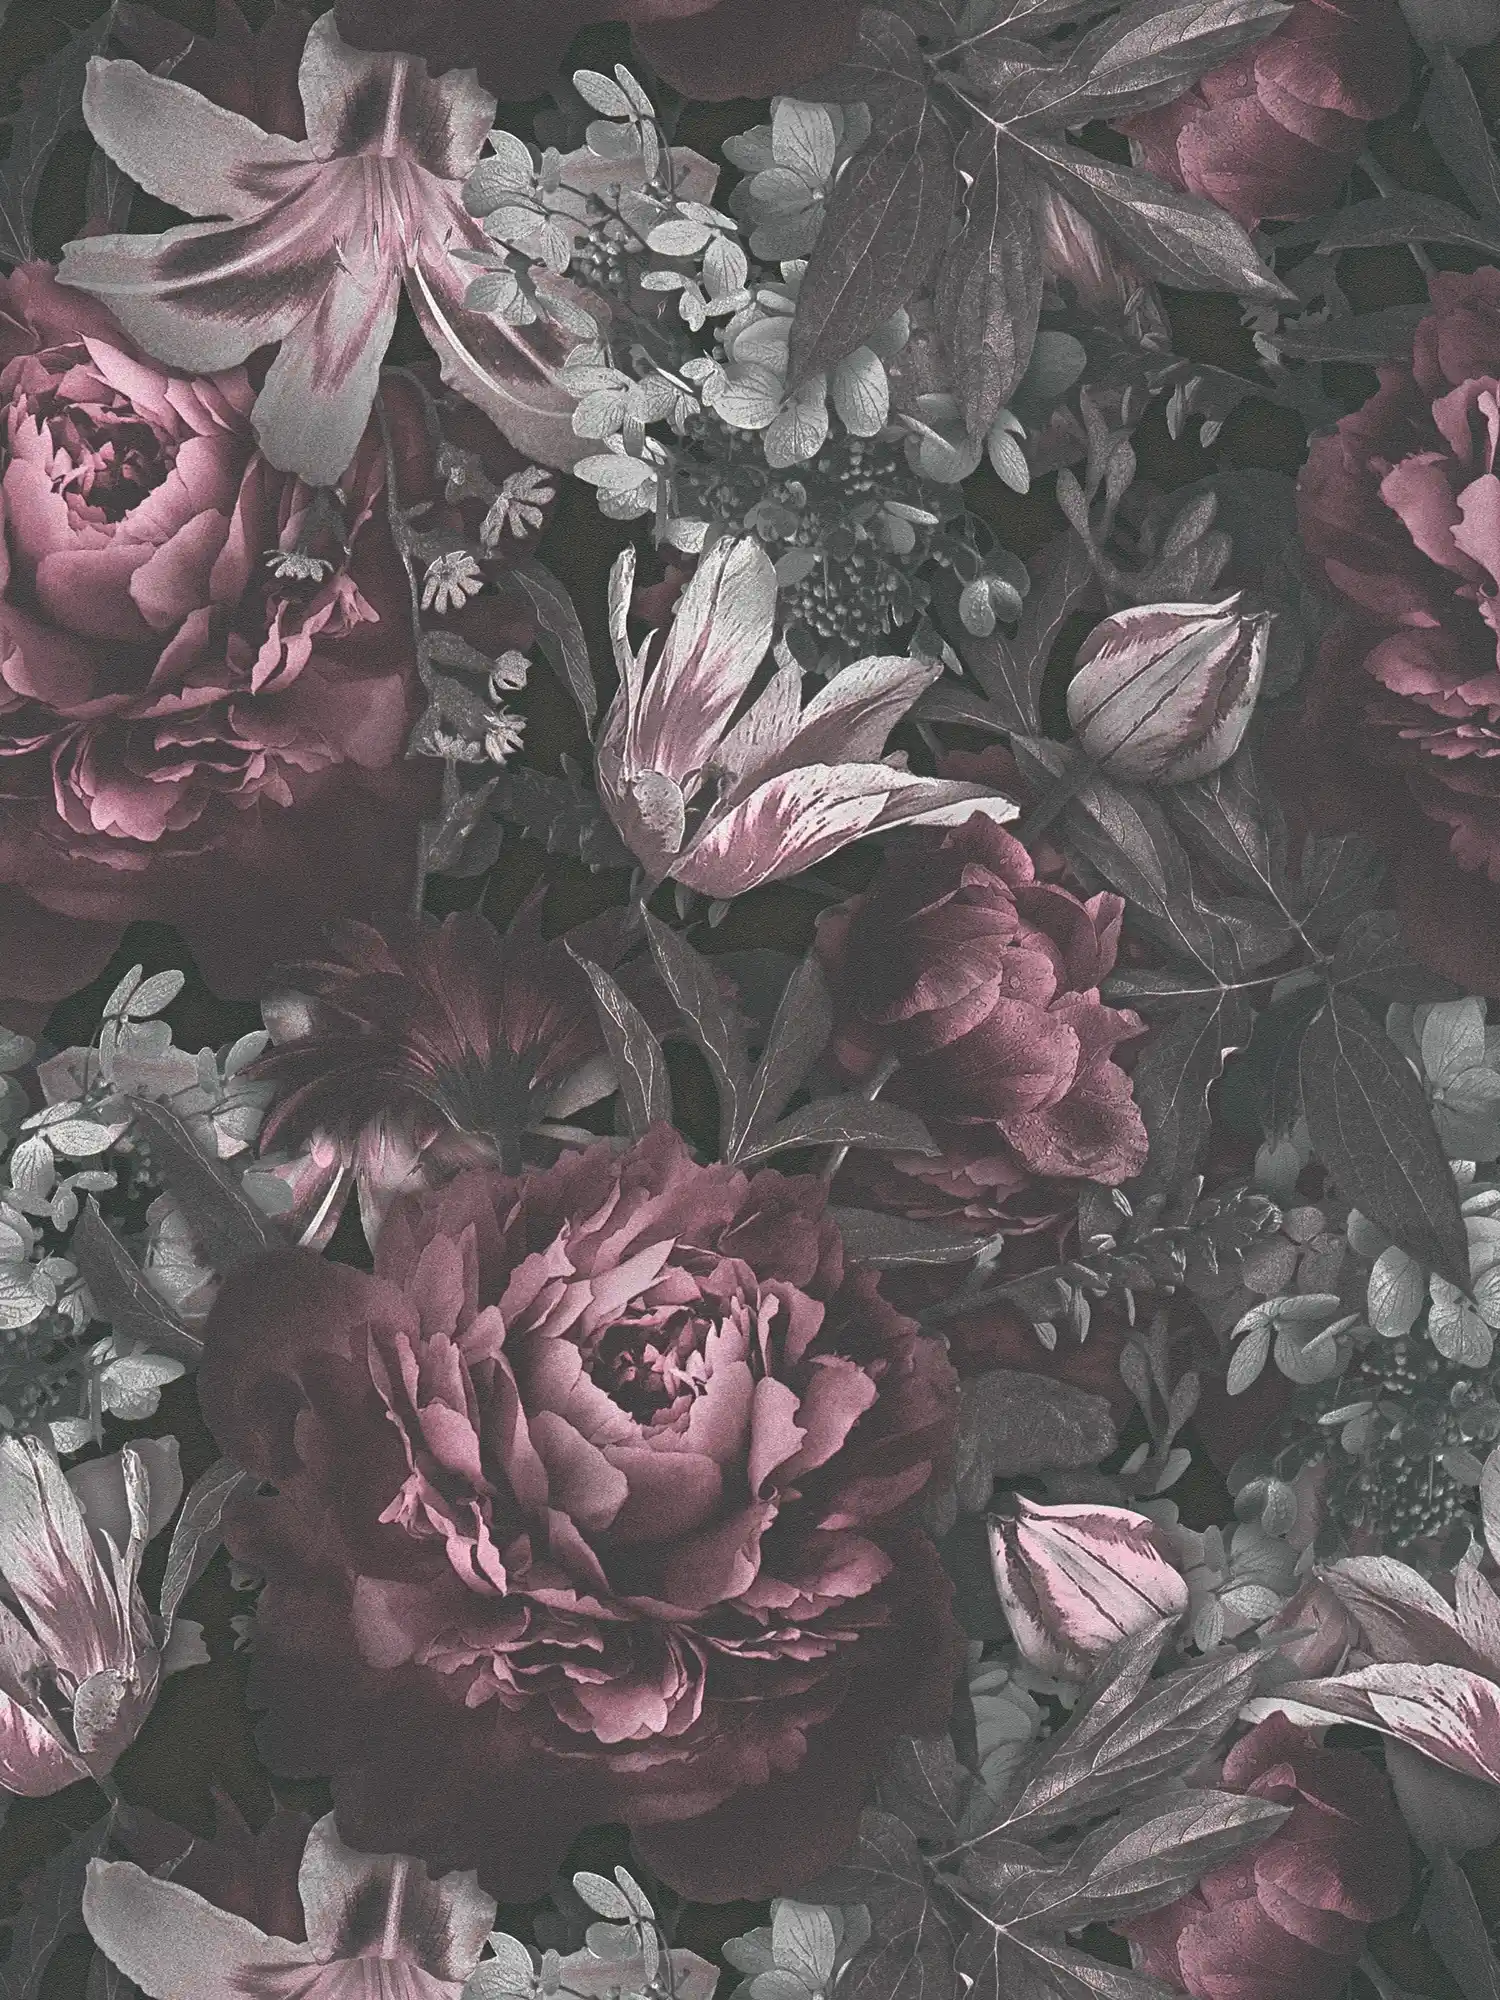 Roses wallpaper flowers in painting style - grey, pink, green
